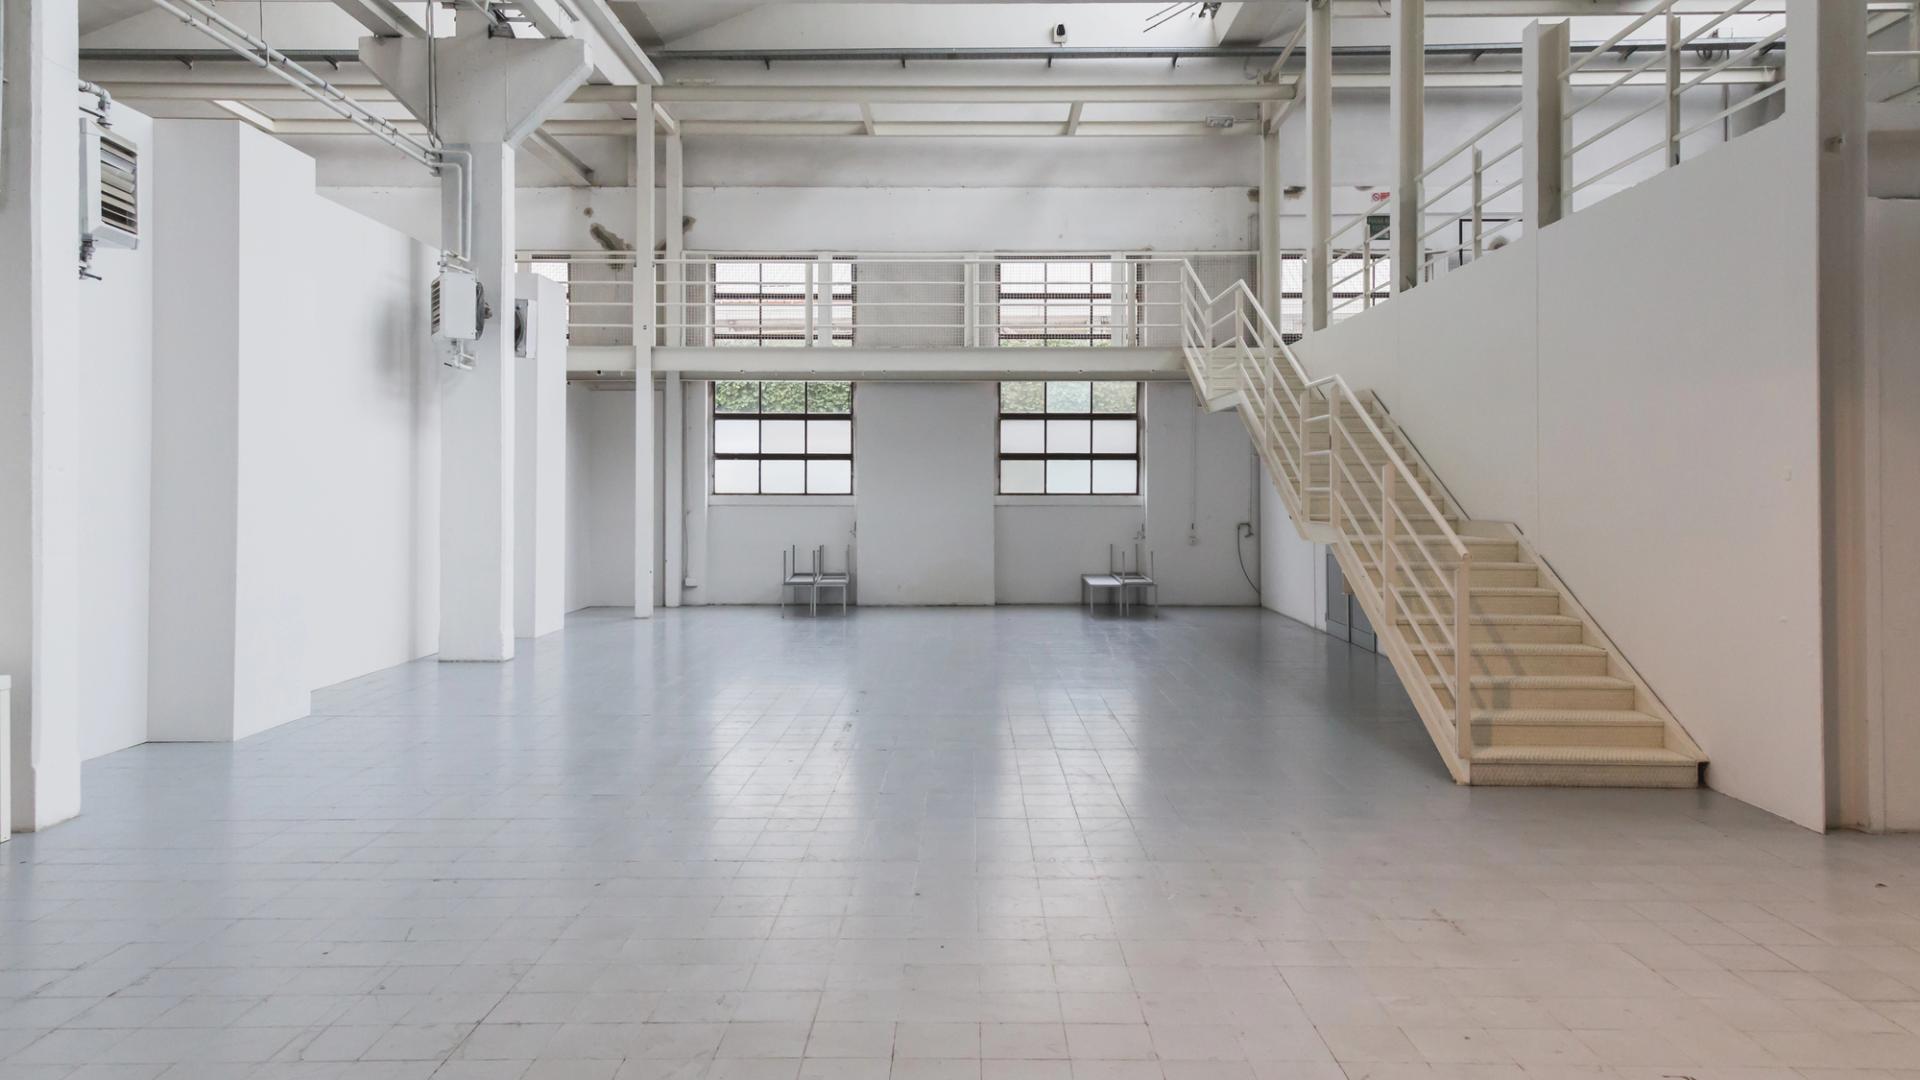 Loft Event Spaces for Hire in Los Angeles, CA